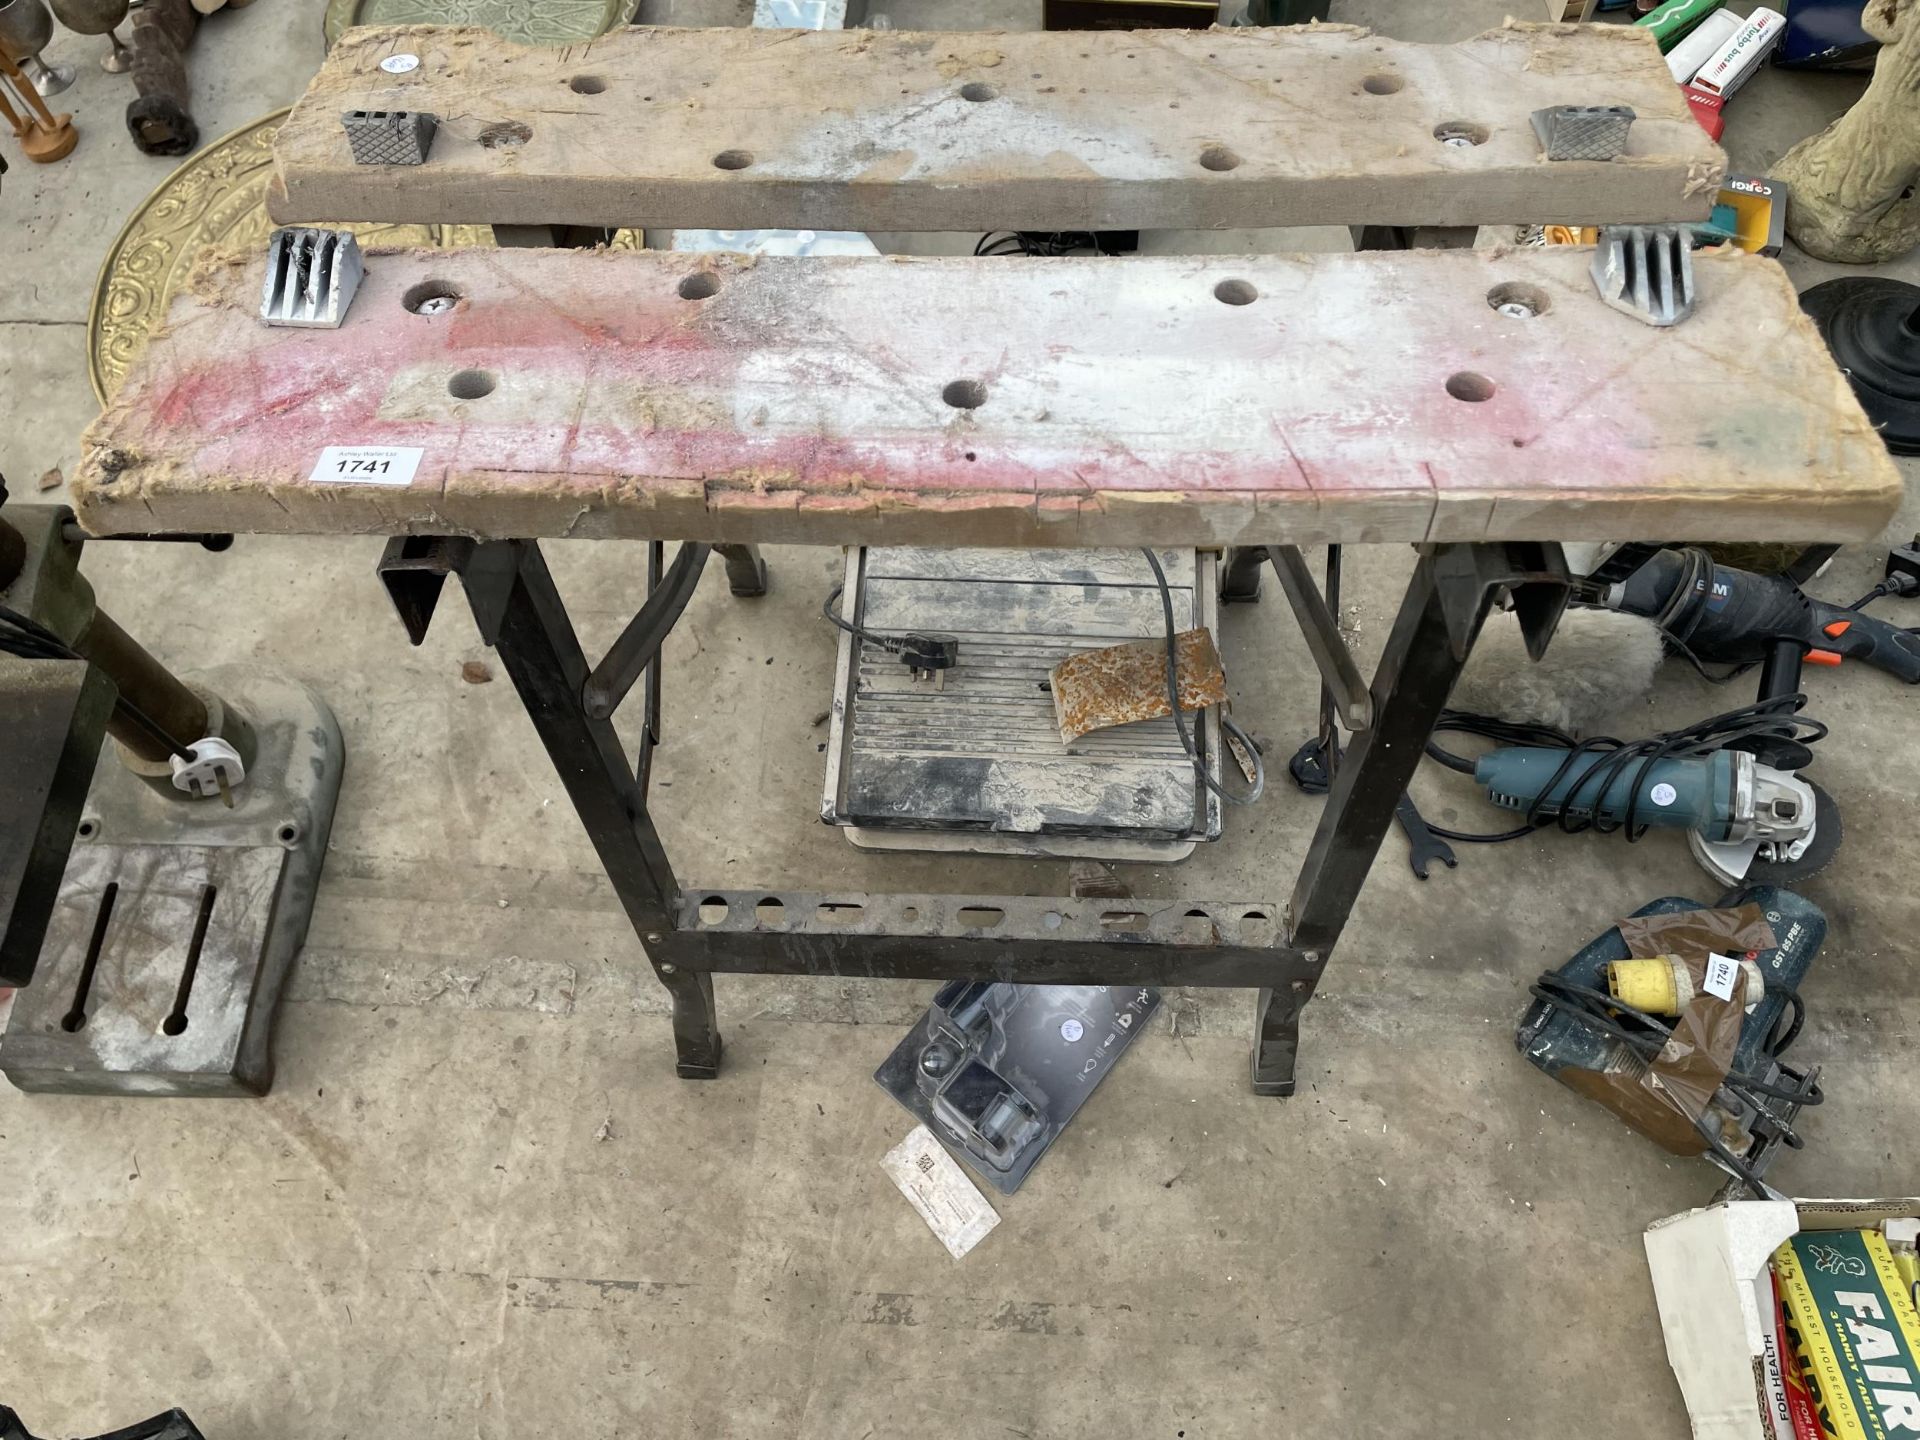 A FOLDING WORKMATE BENCH AND AN ELECTRIC TILE CUTTER